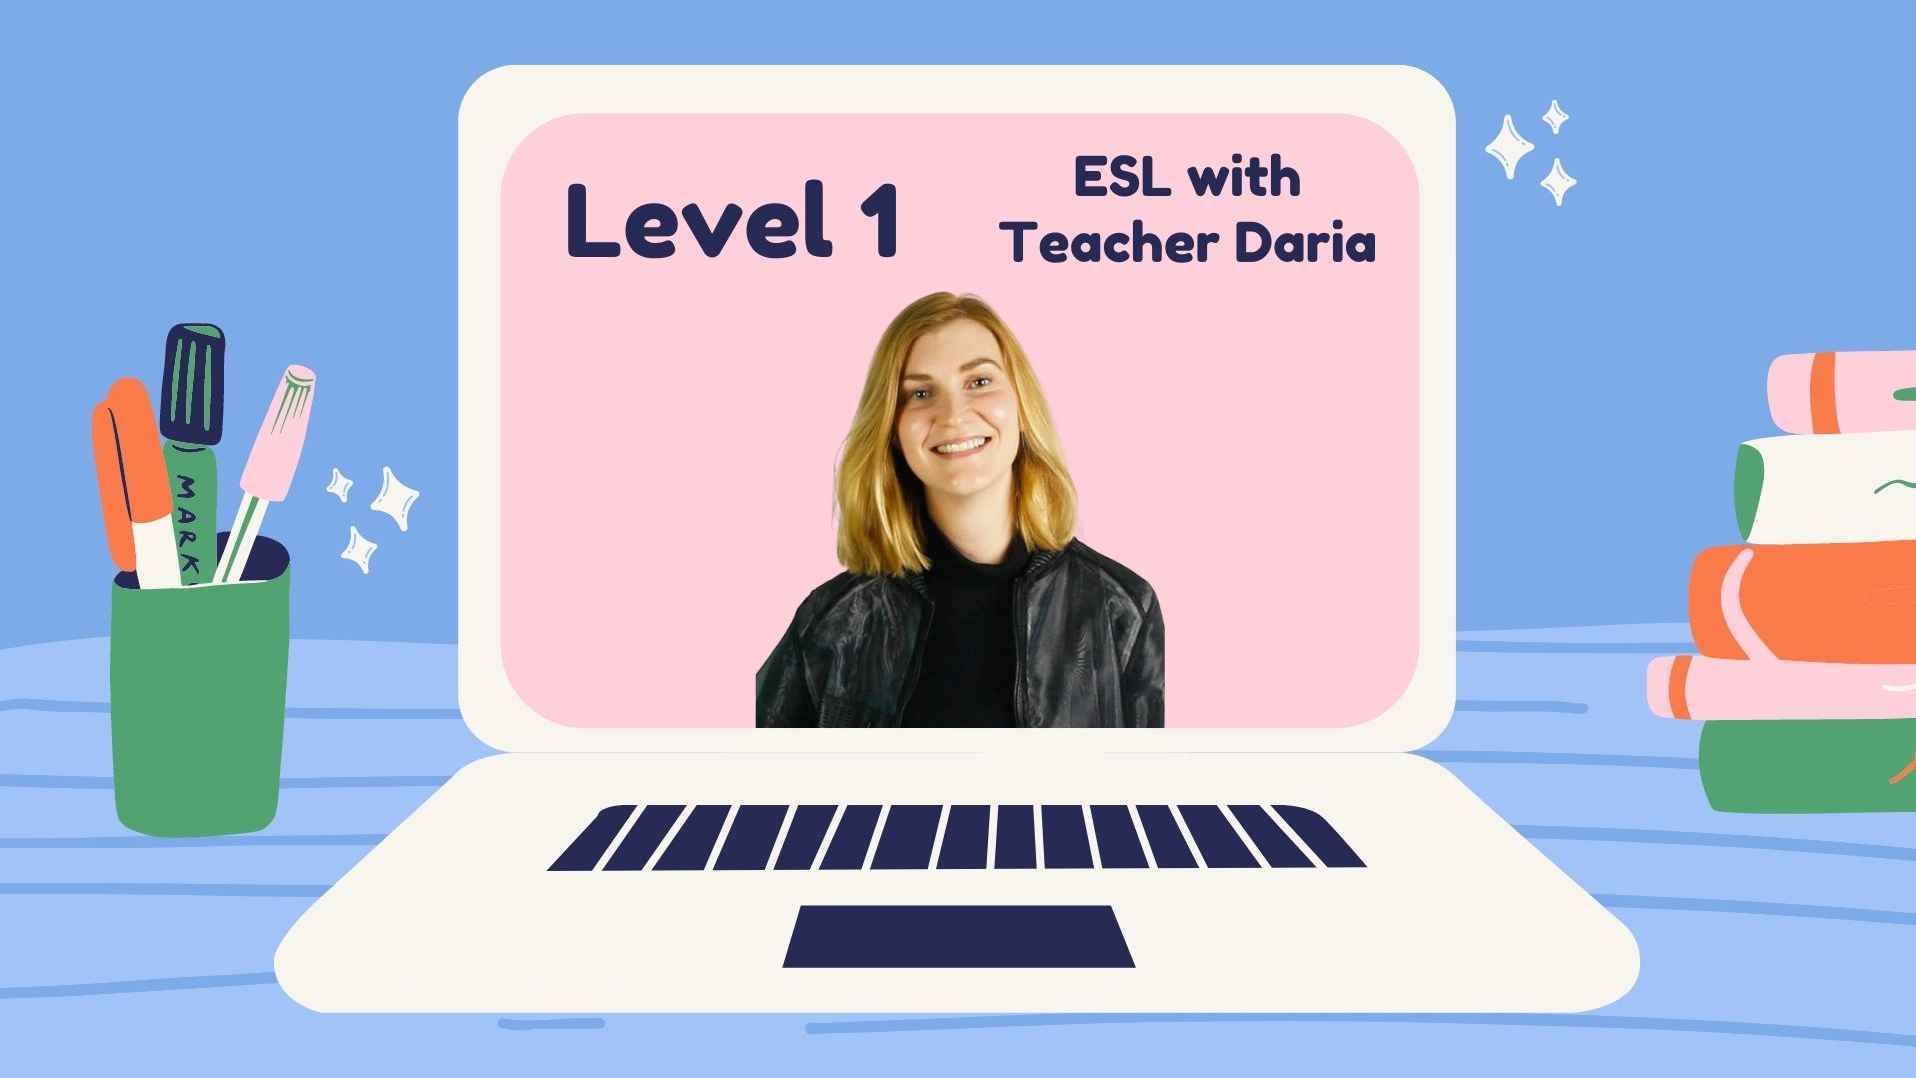 Esl English As A Second Language Level 1 Course With Teacher Daria Live Interative Class For